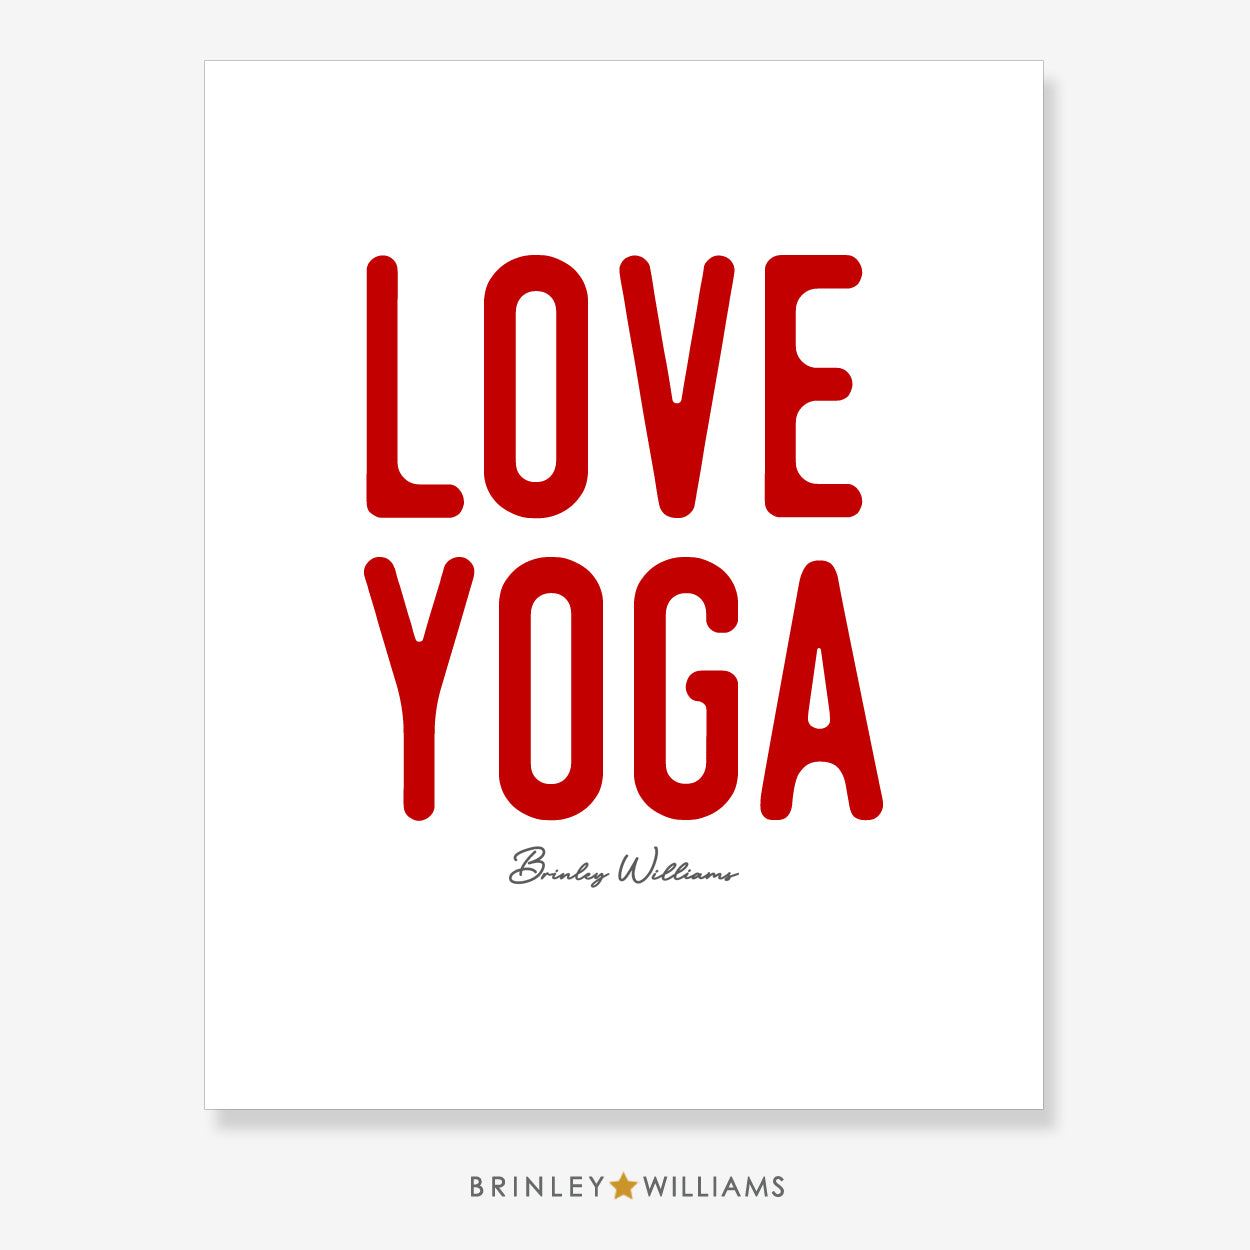 Love Yoga Wall Art Poster - Red